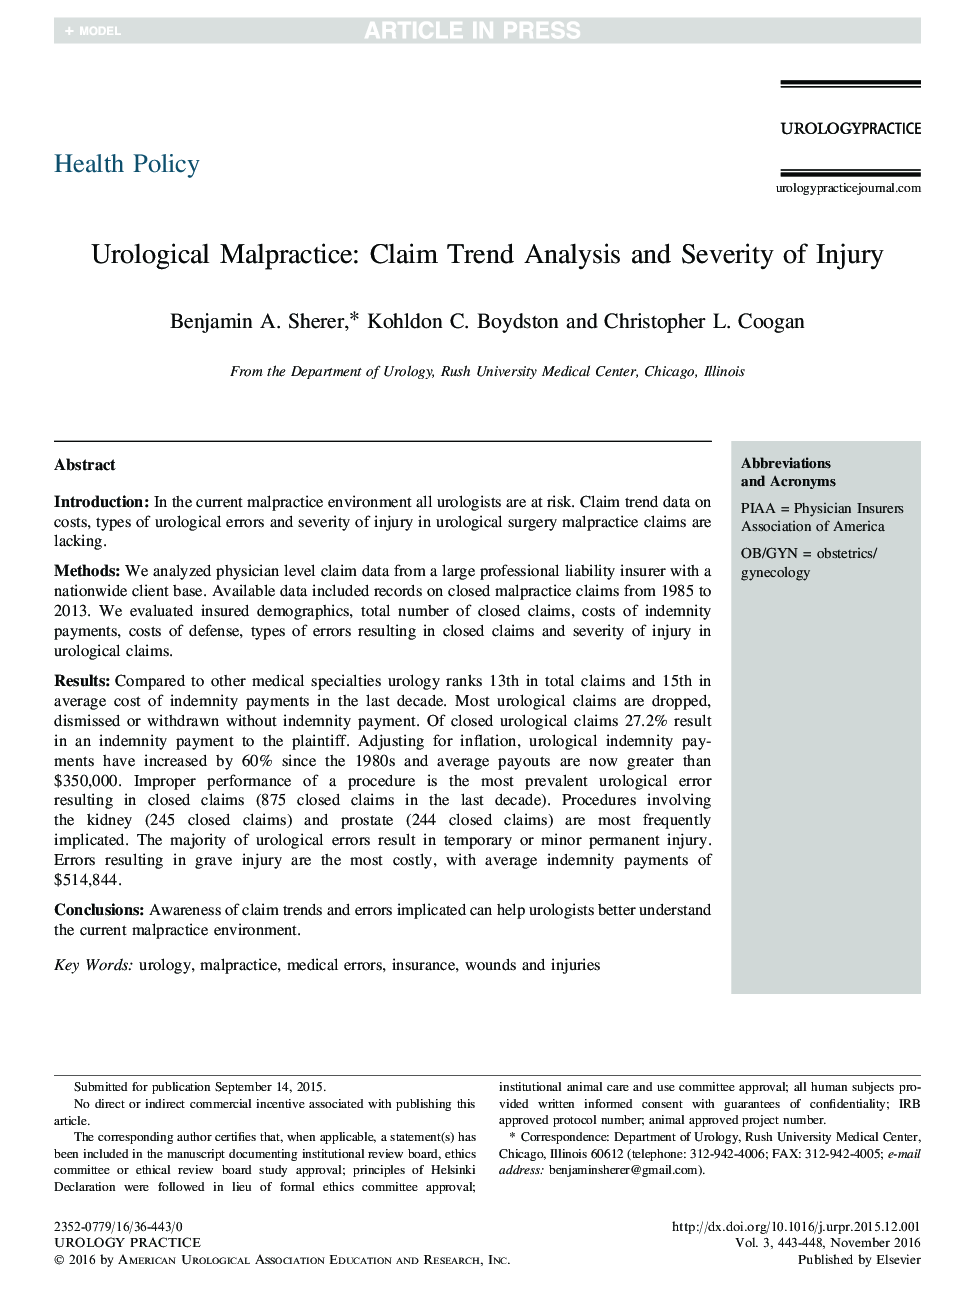 Urological Malpractice: Claim Trend Analysis and Severity of Injury